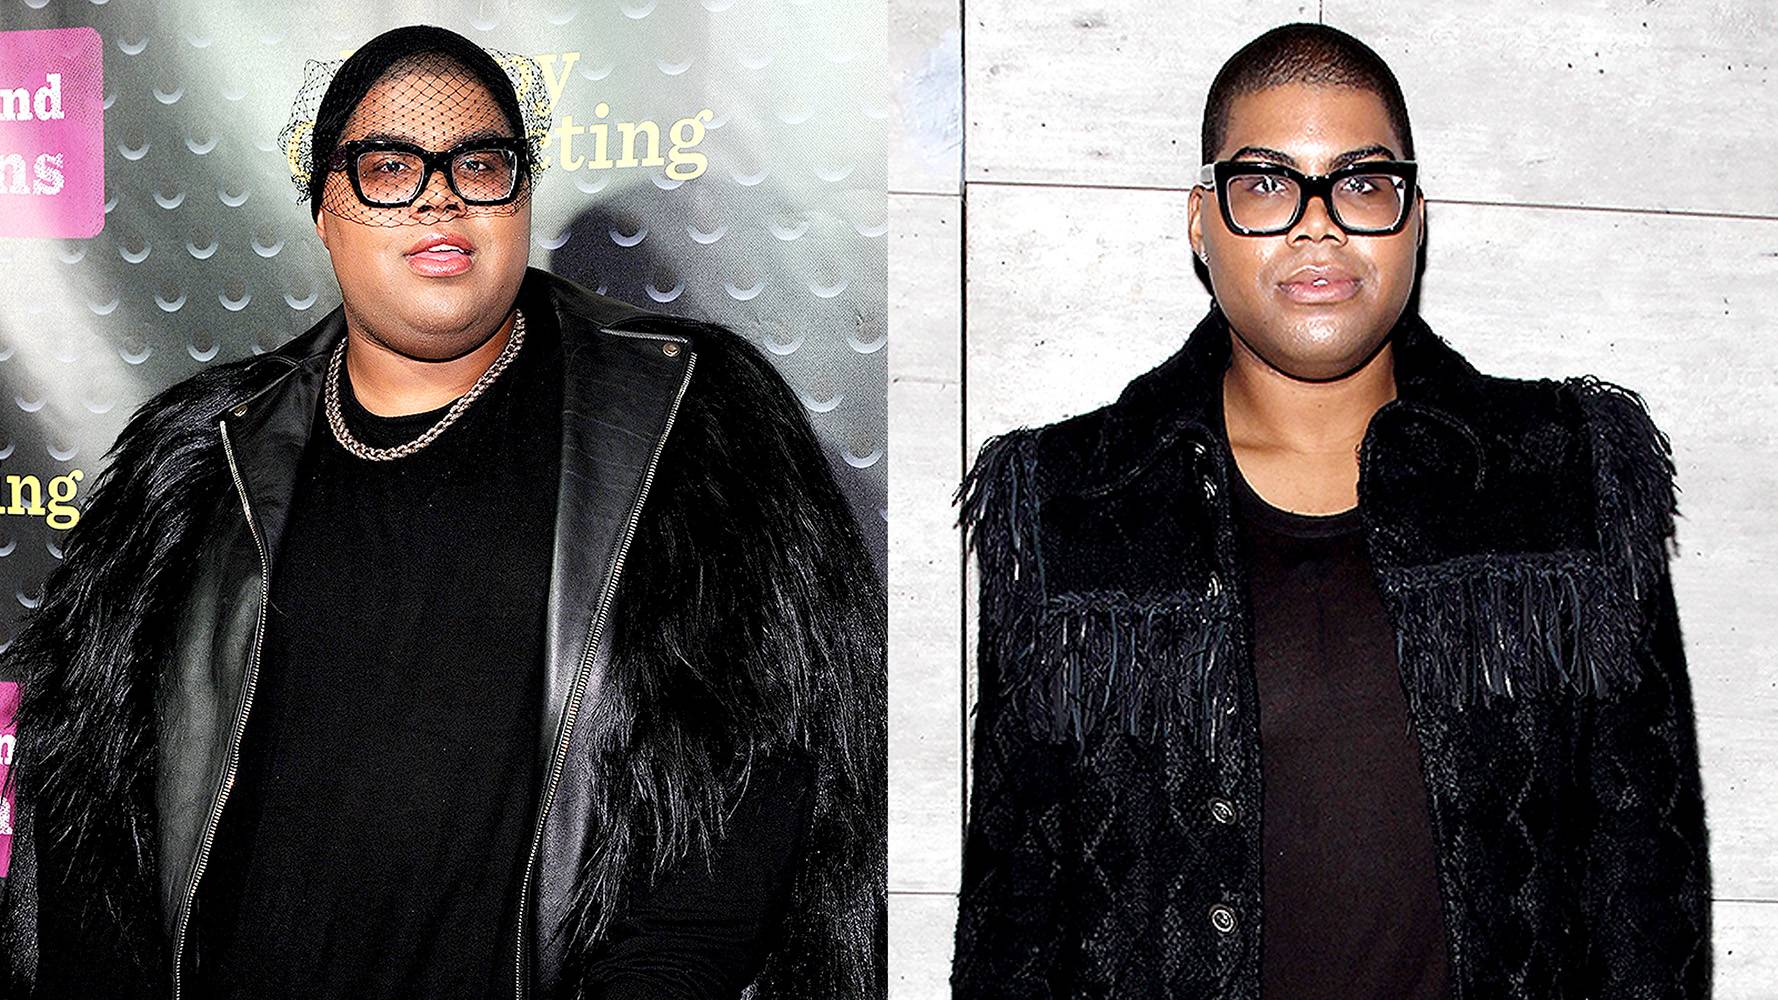 EJ Johnson - Magic Johnson's son, EJ Johnson, is the latest high-profile star to take drastic measures to lose weight.&nbsp;He told Wendy Williams that he lost 100 pounds in eight months after undergoing gastric bypass surgery. Keep reading for a look at other stars who went under the knife.&nbsp;— Britt Middleton&nbsp;(Photos from Left: Ilya S. Savenok/Getty Images for Sprint, Astrid Stawiarz/Getty Images for Mercedes-Benz Fashion Week)